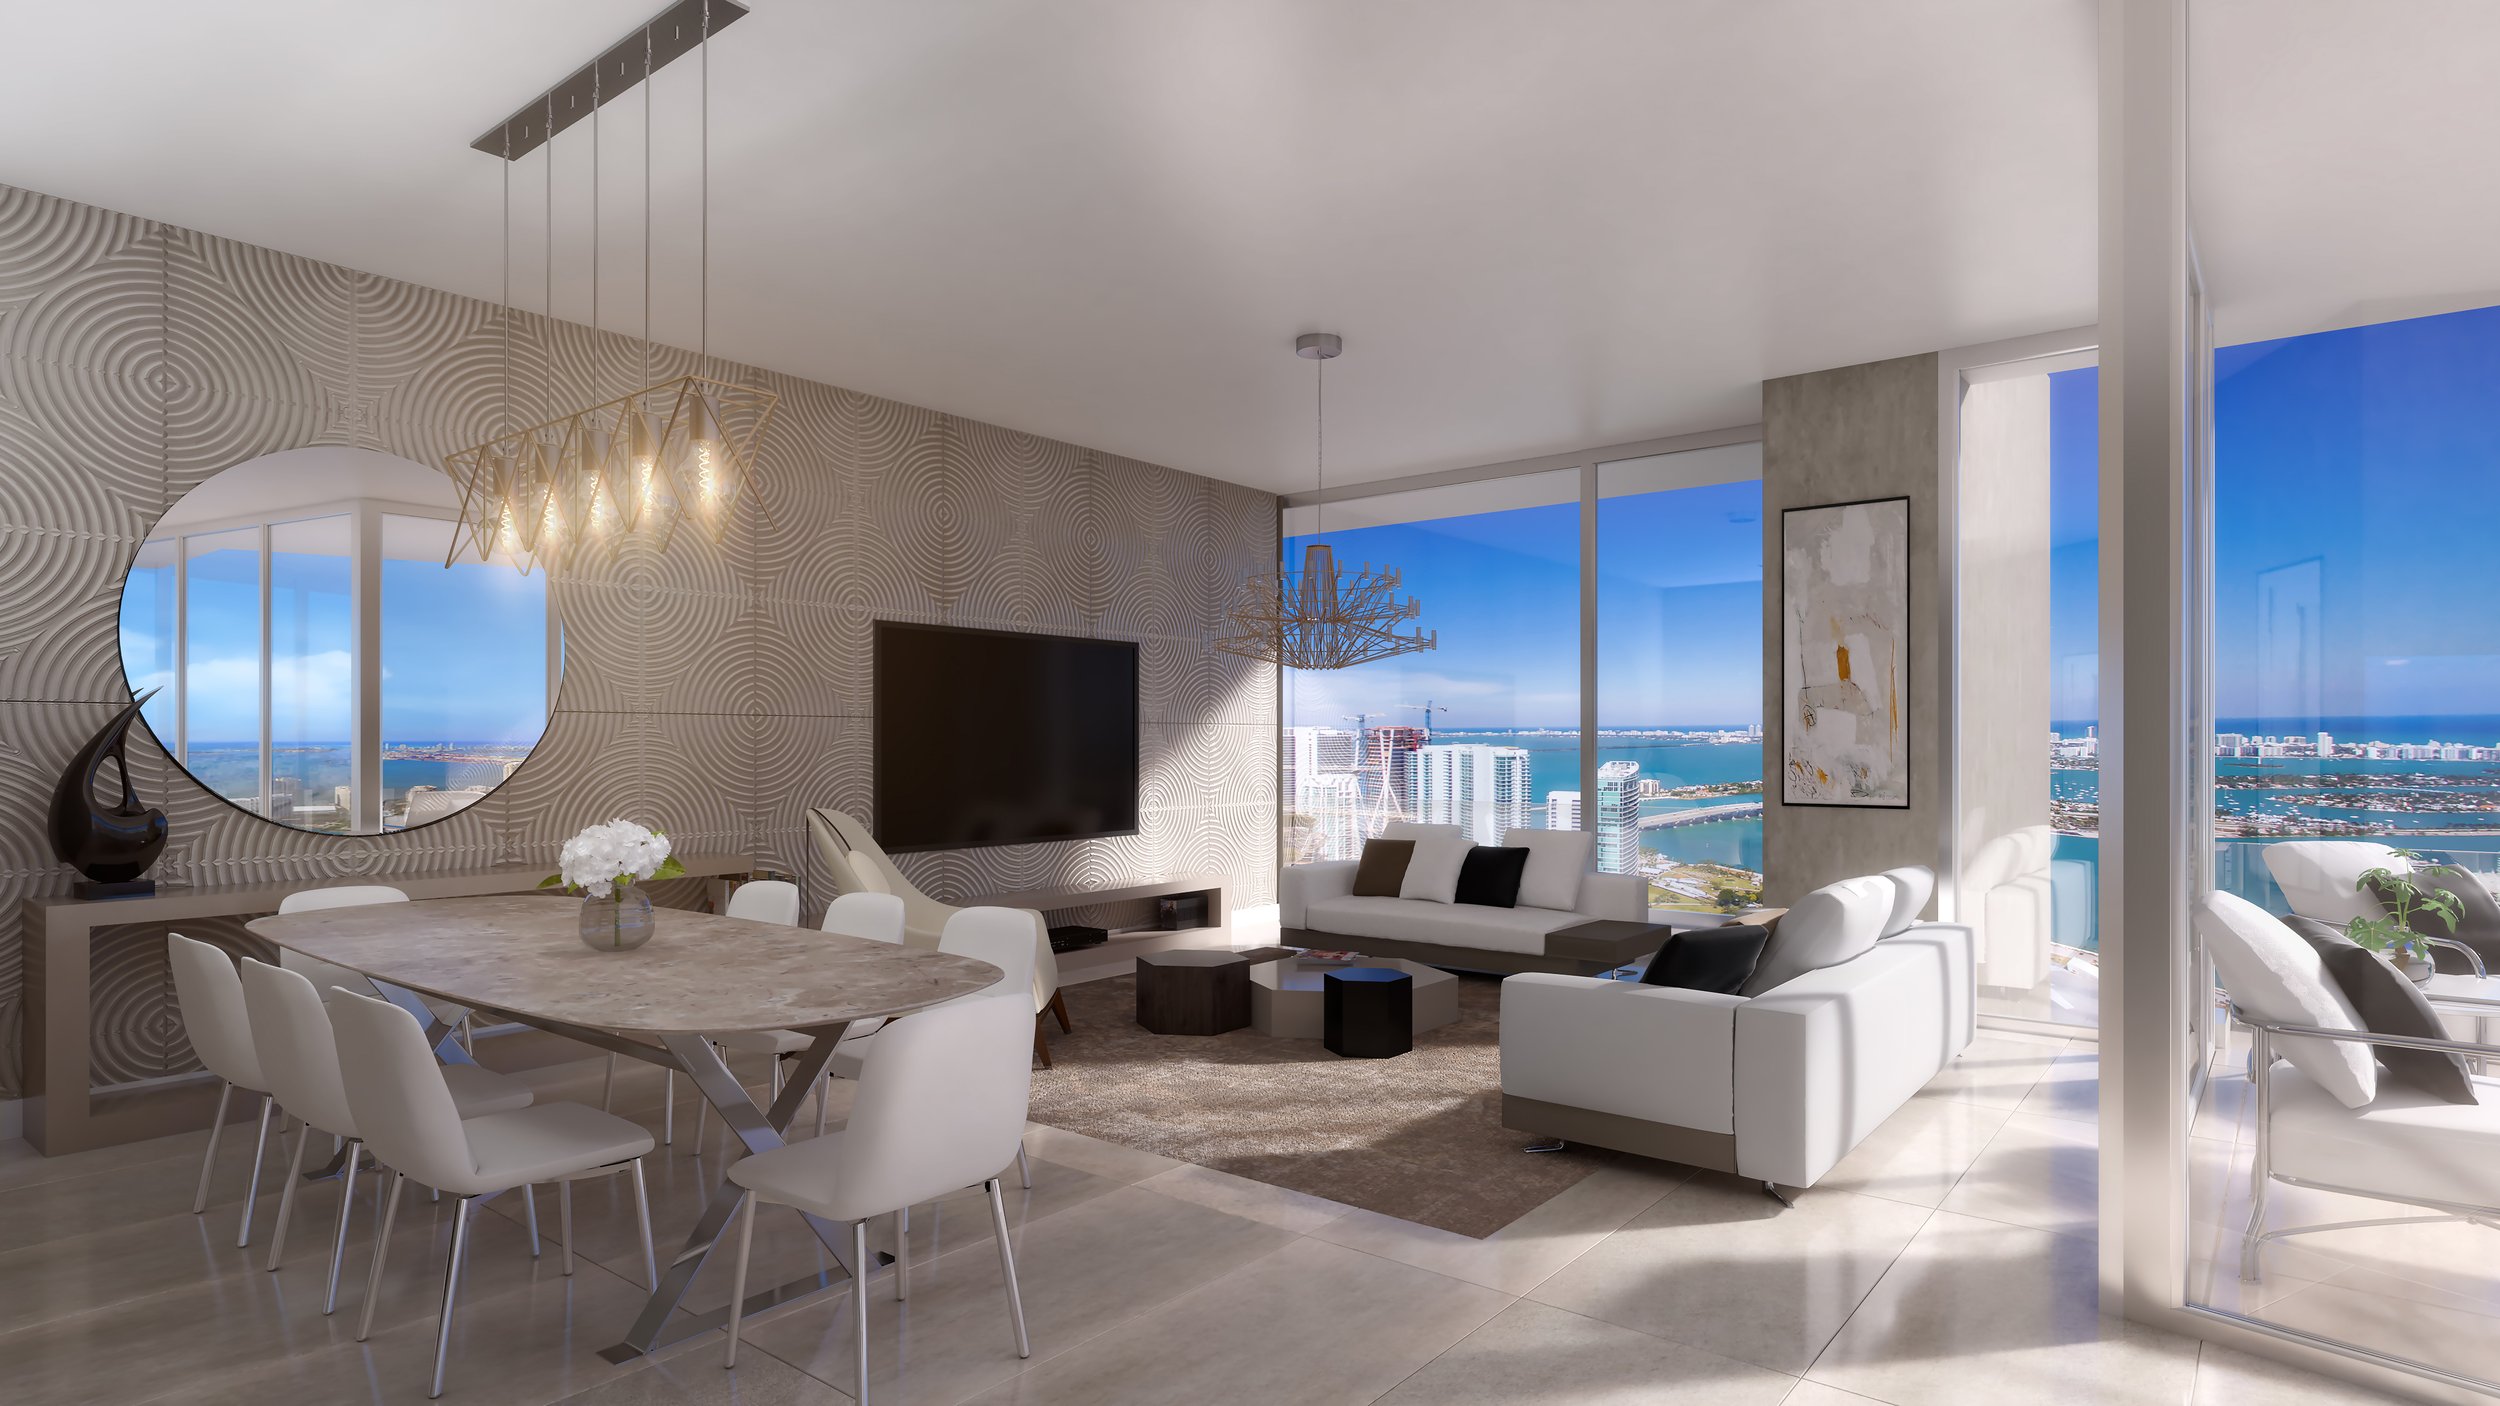 Okan Tower Anchored By Hilton Hotel Breaks Ground In Downtown Miami 6.jpg